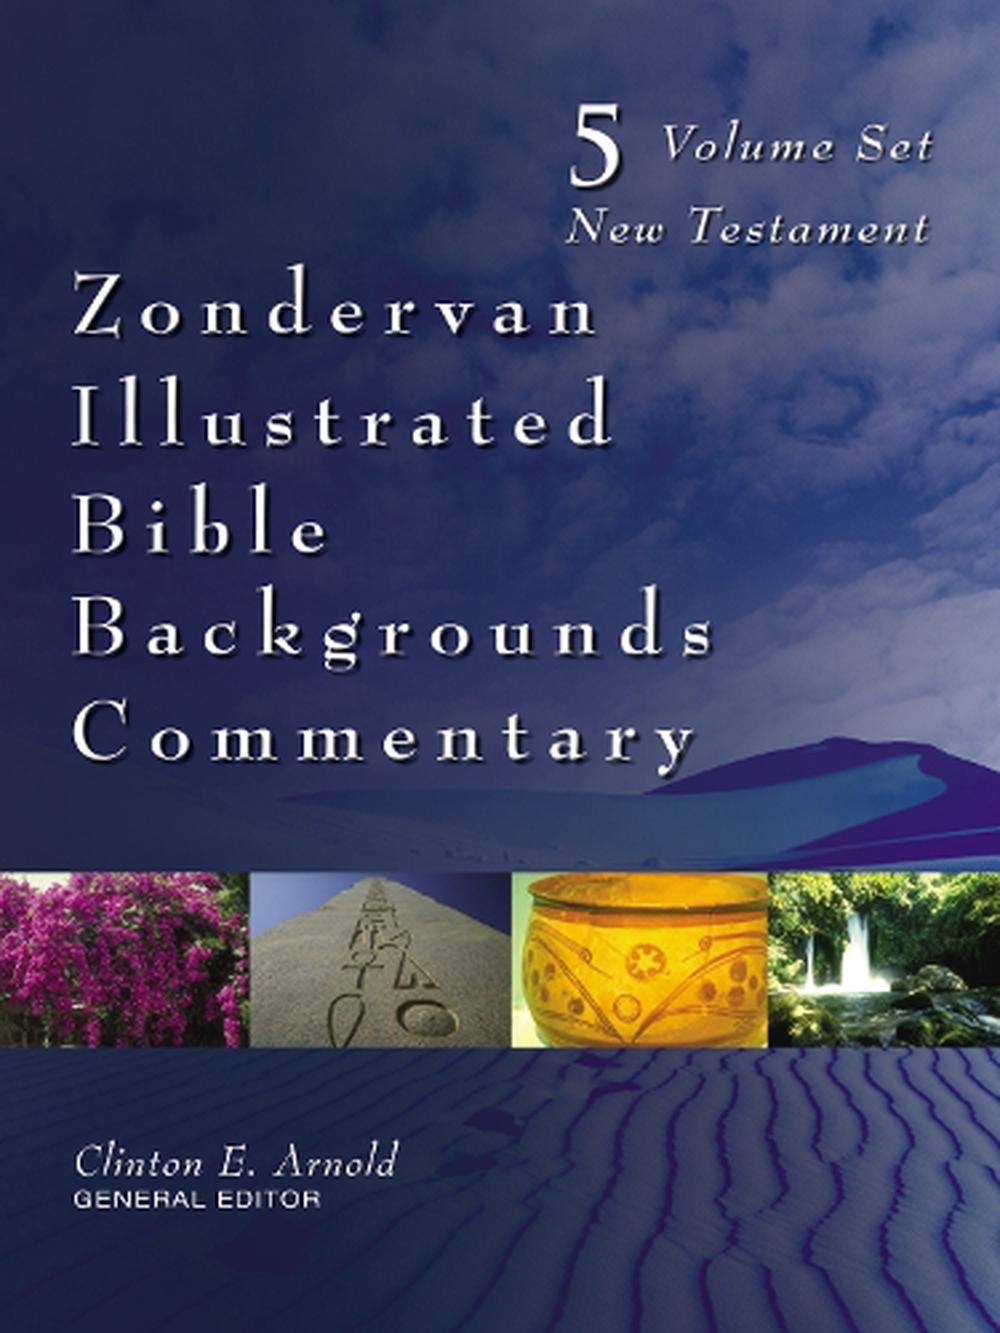 Buy　by　Zondervan　E.　at　Arnold,　The　Illustrated　9780310598756　online　Nile　Bible　Backgrounds　Clinton　Commentary　Set　Hardcover,